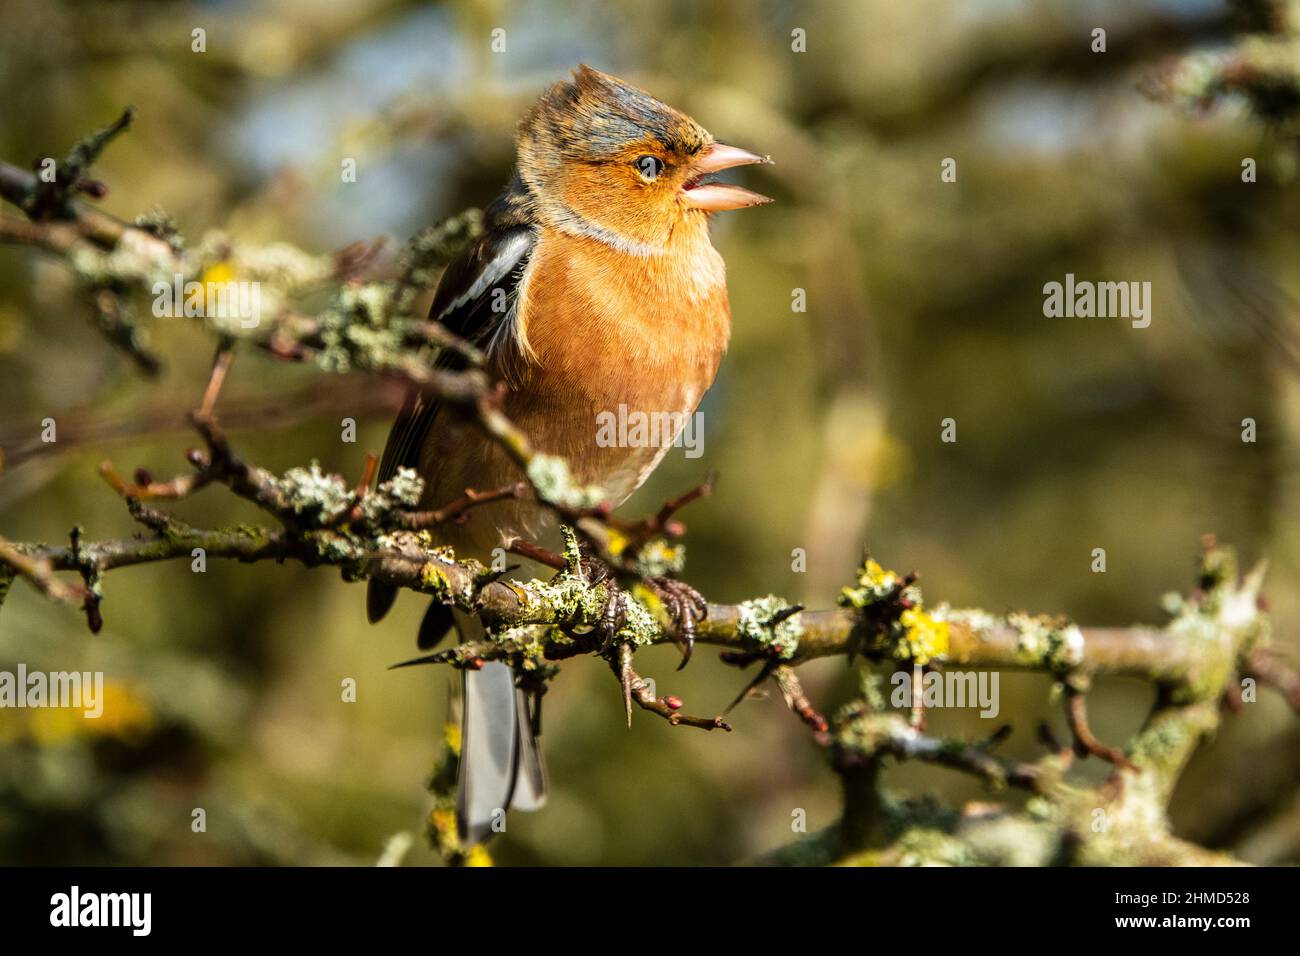 Common male chaffinch sitting on a small twig branch without leaf, Suffolk, UK Stock Photo